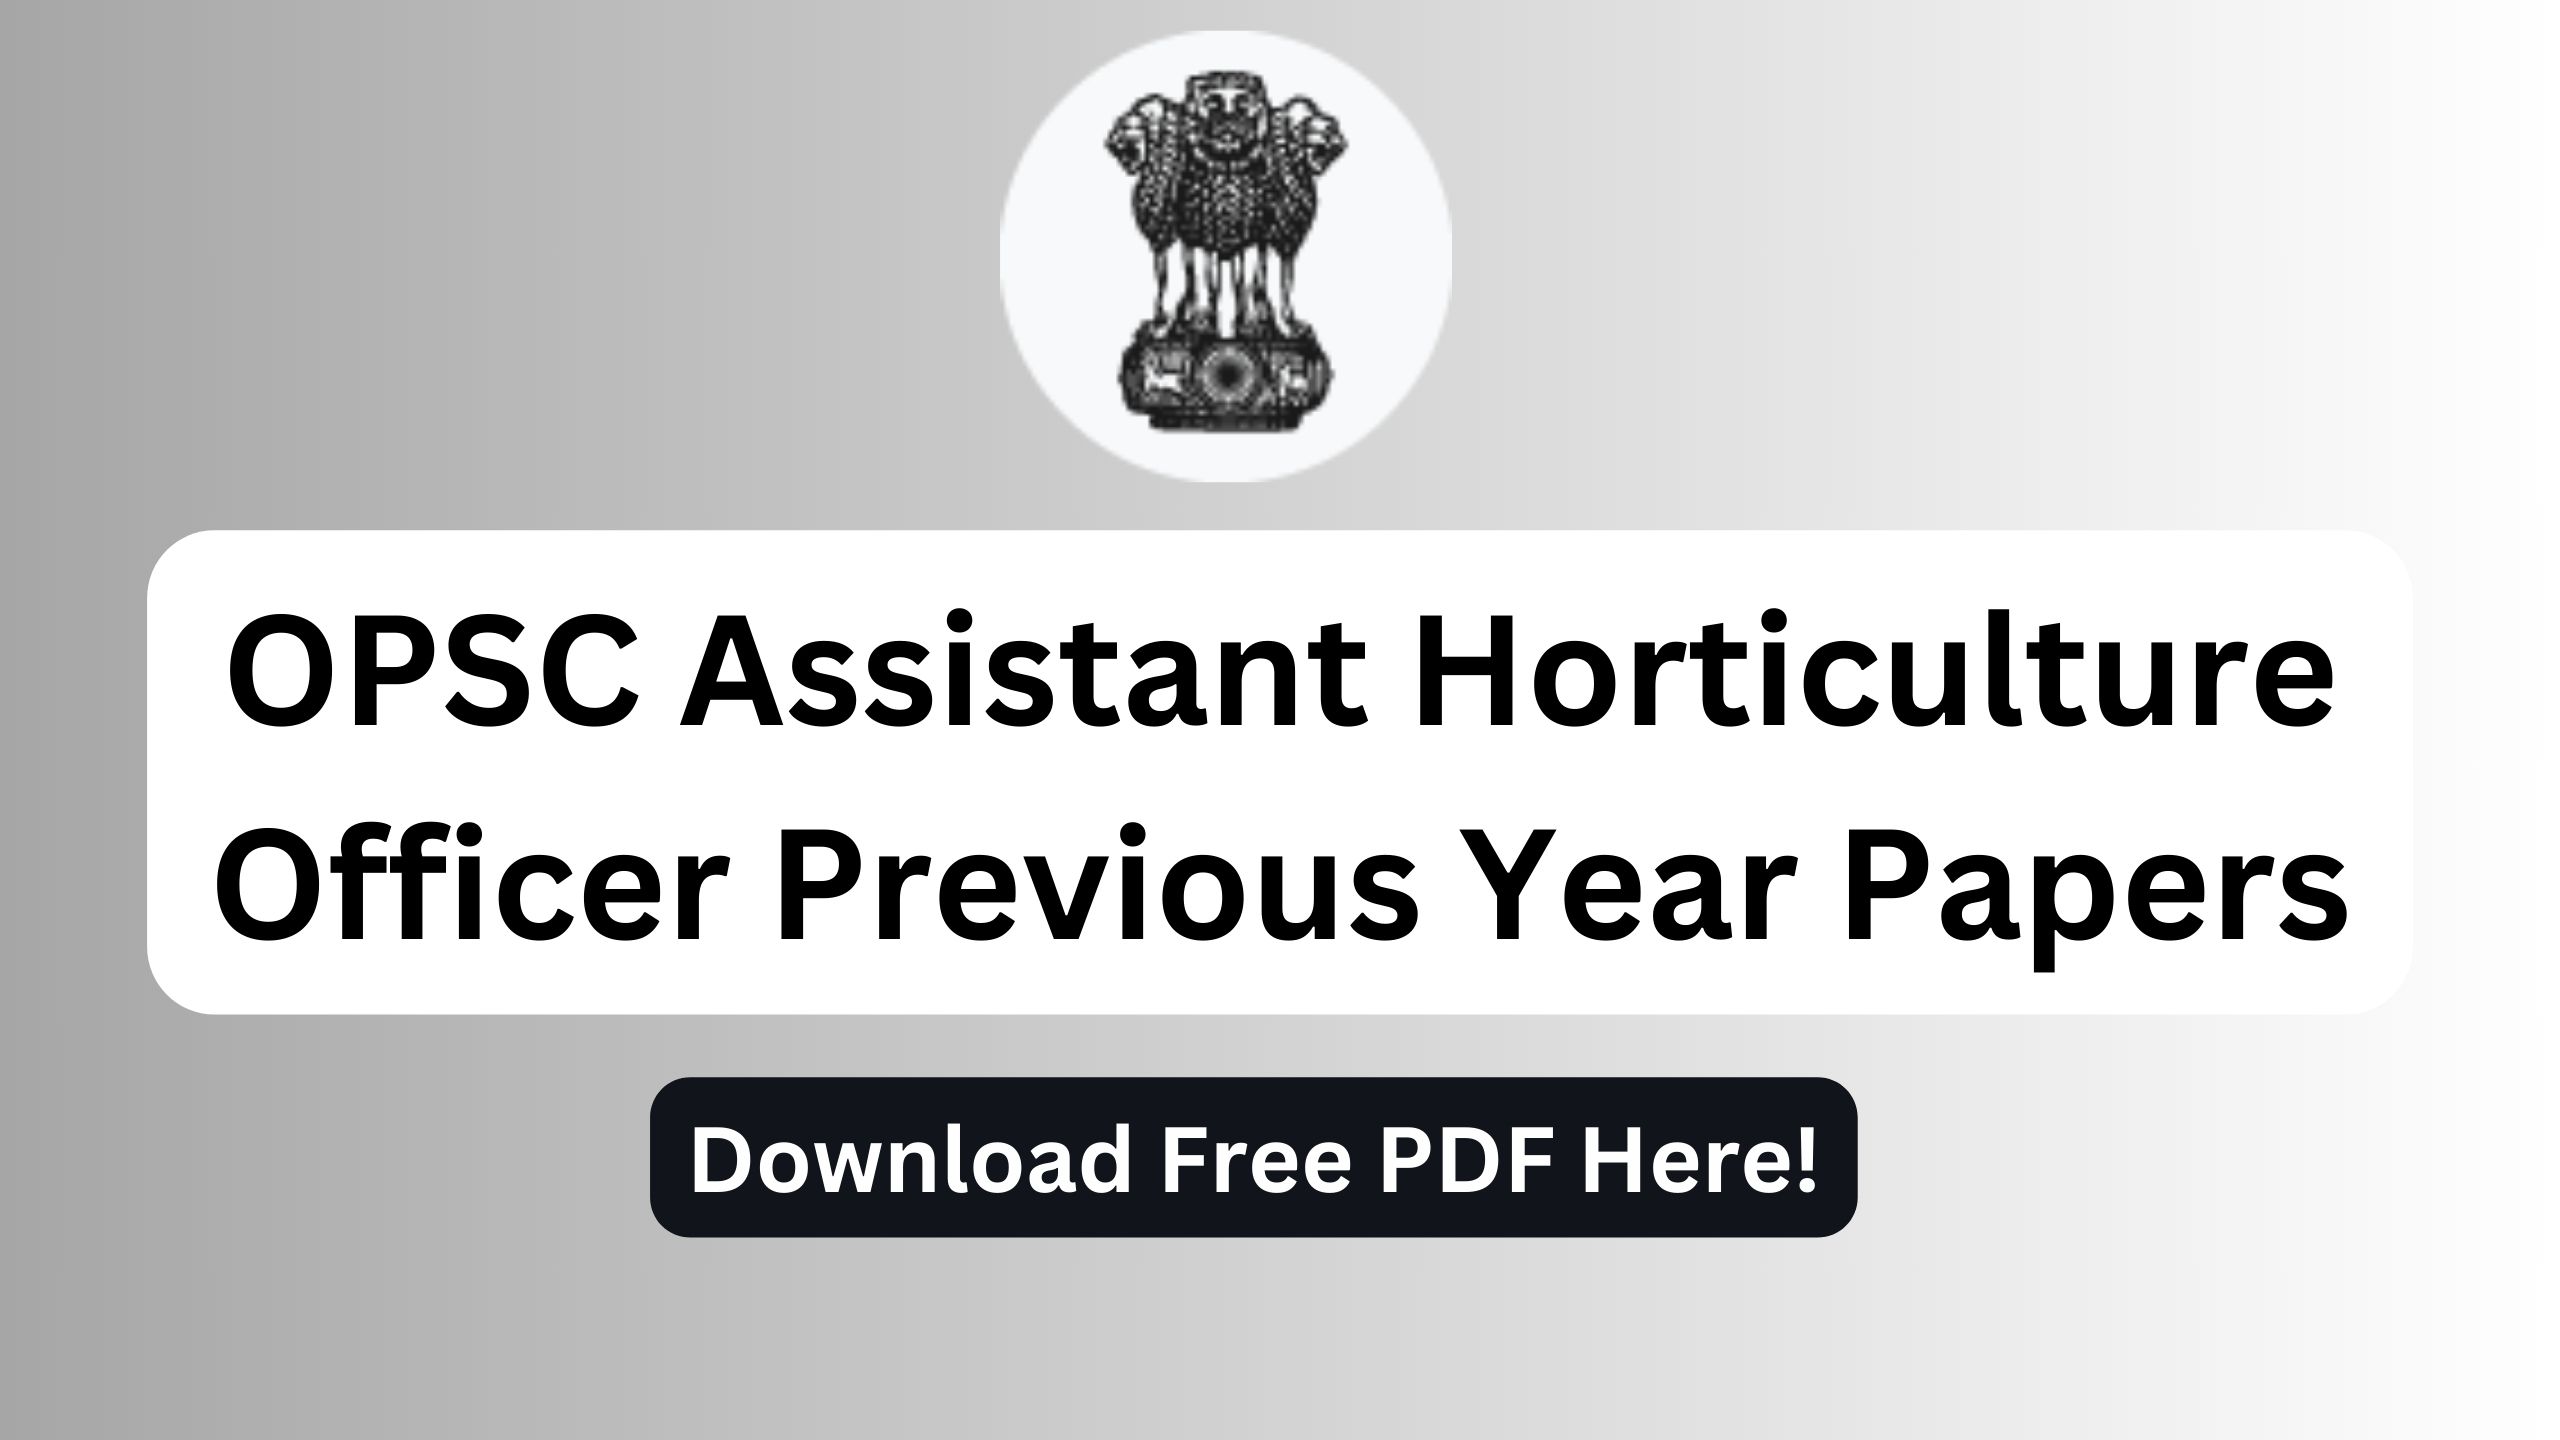 OPSC Assistant Horticulture Officer Previous Year Papers